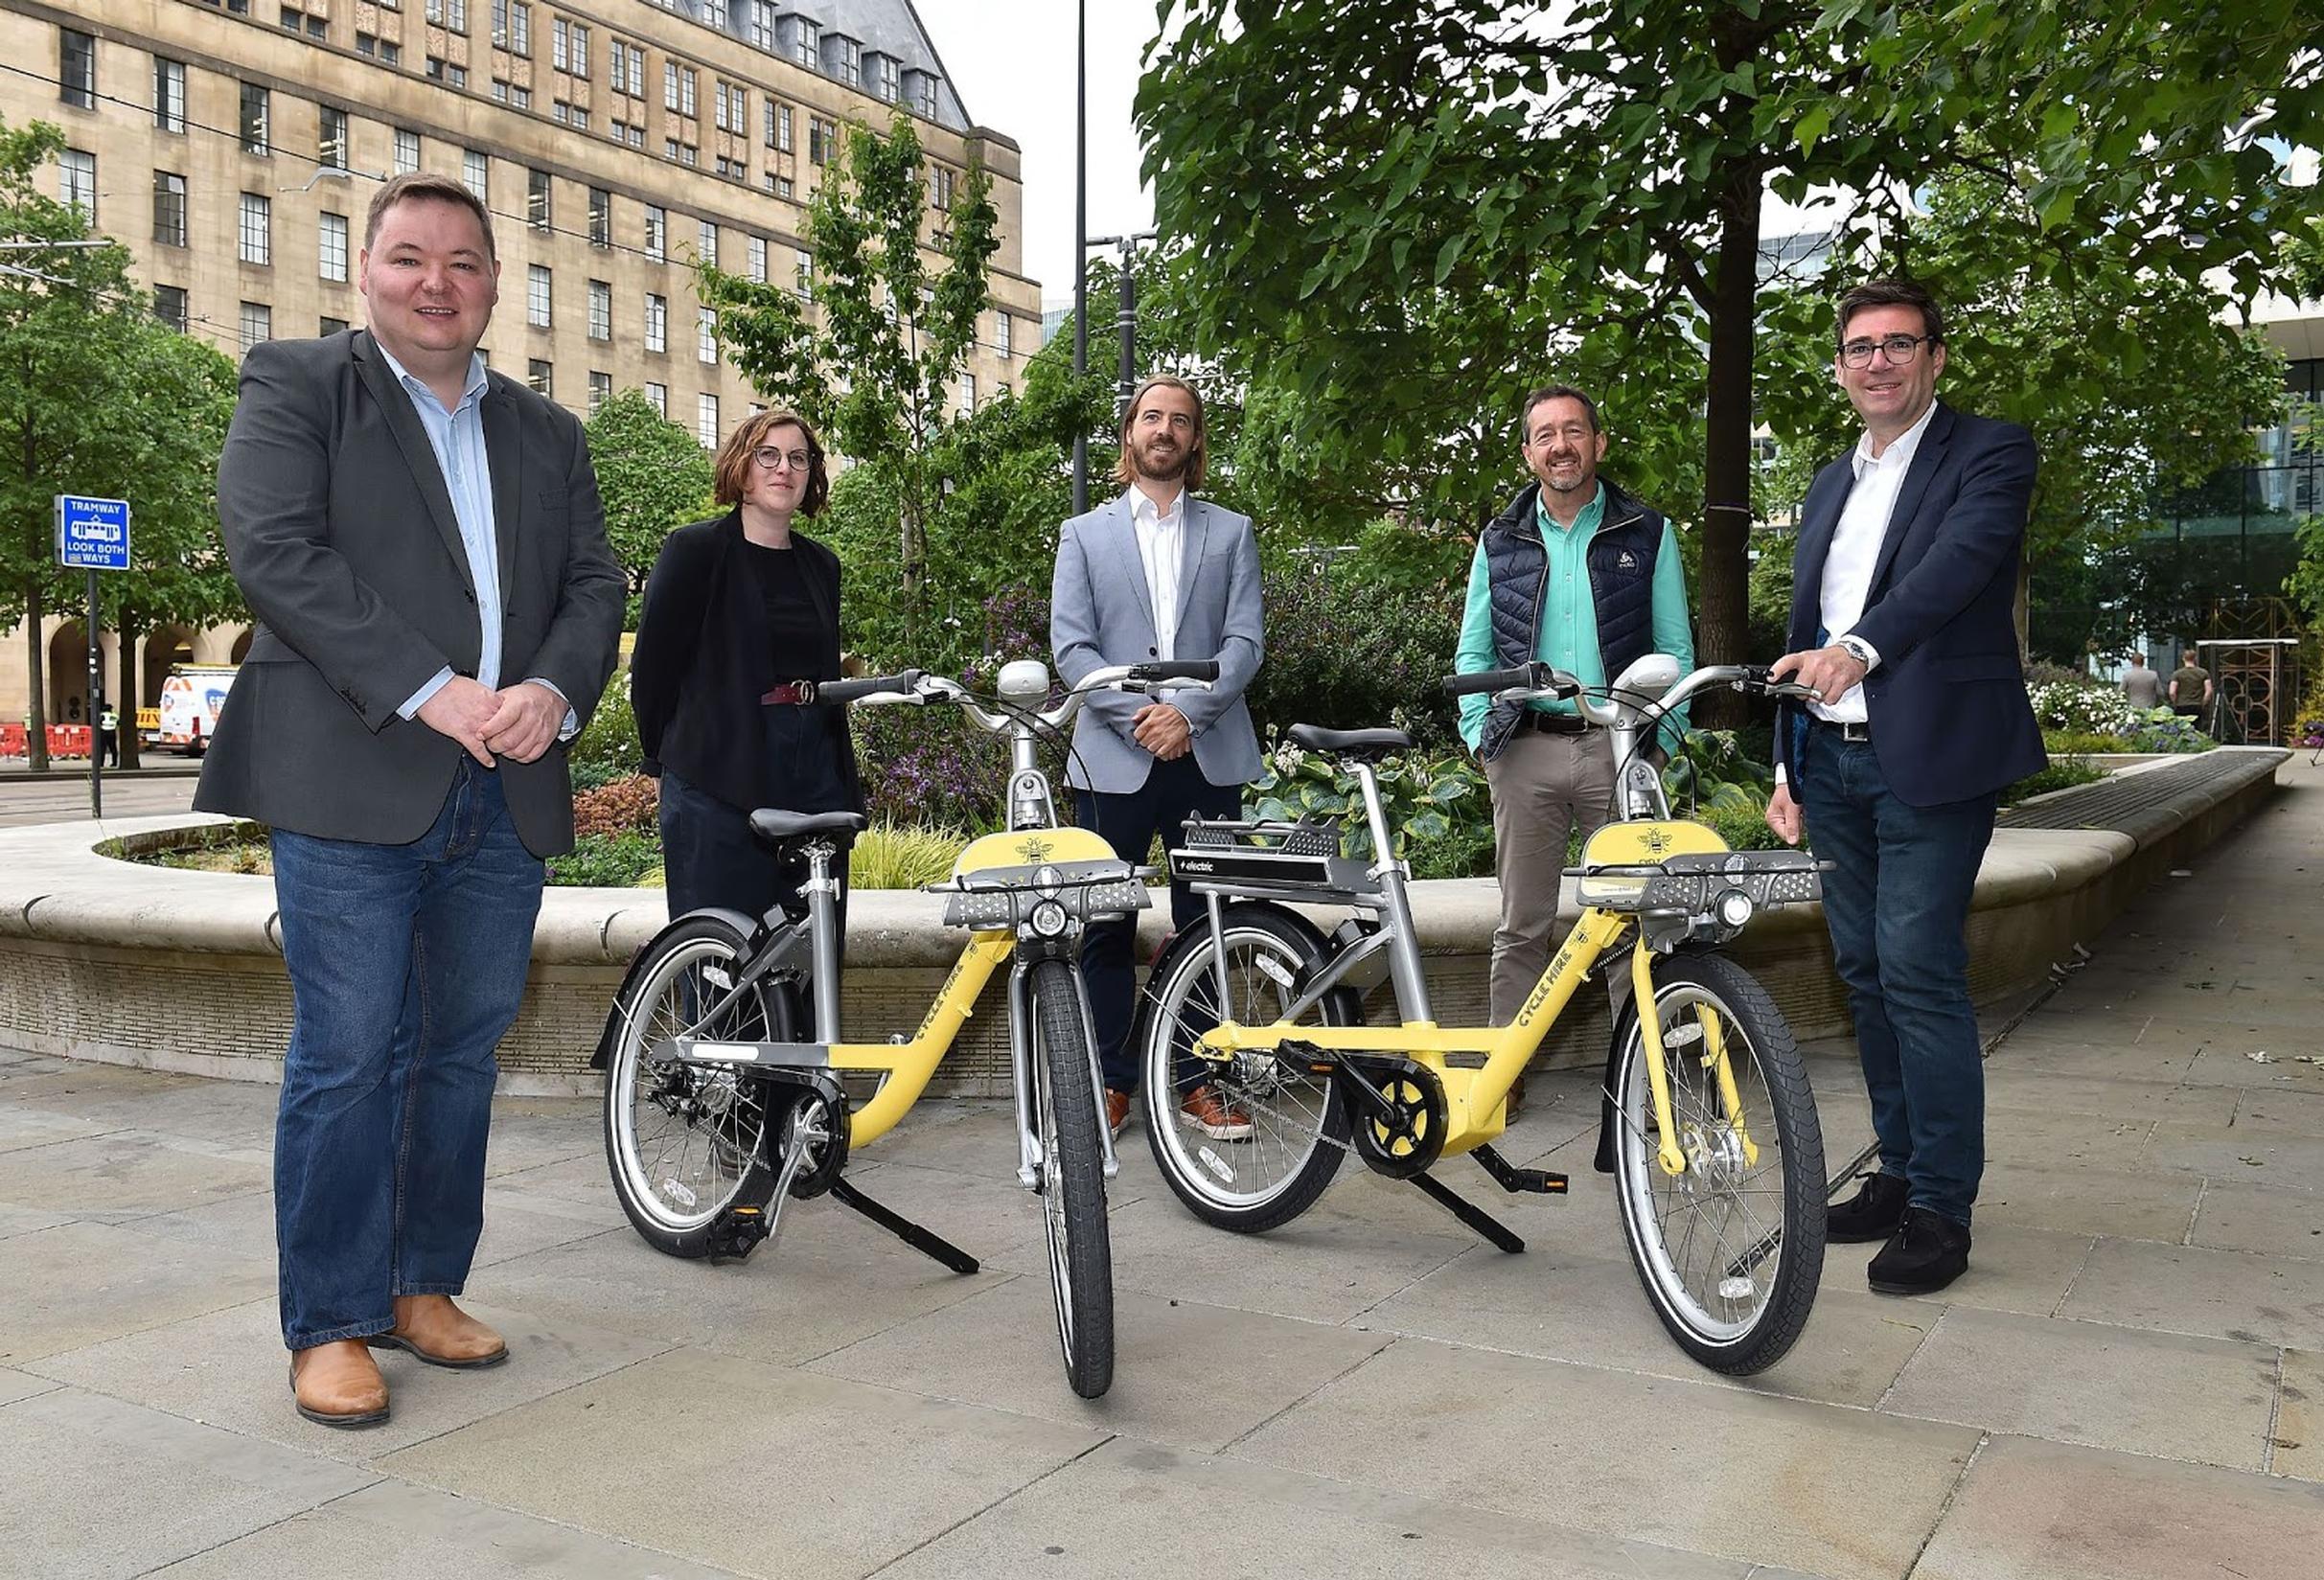 From left to right: Councillor Andrew Western, Leader of Trafford Council and Greater Manchester’s Clean Air Lead, Nyree Hughes - Head of Marketing and Communications at Beryl, Phil Ellis - CEO at Beryl, with Chris Boardman and Andy Burnham